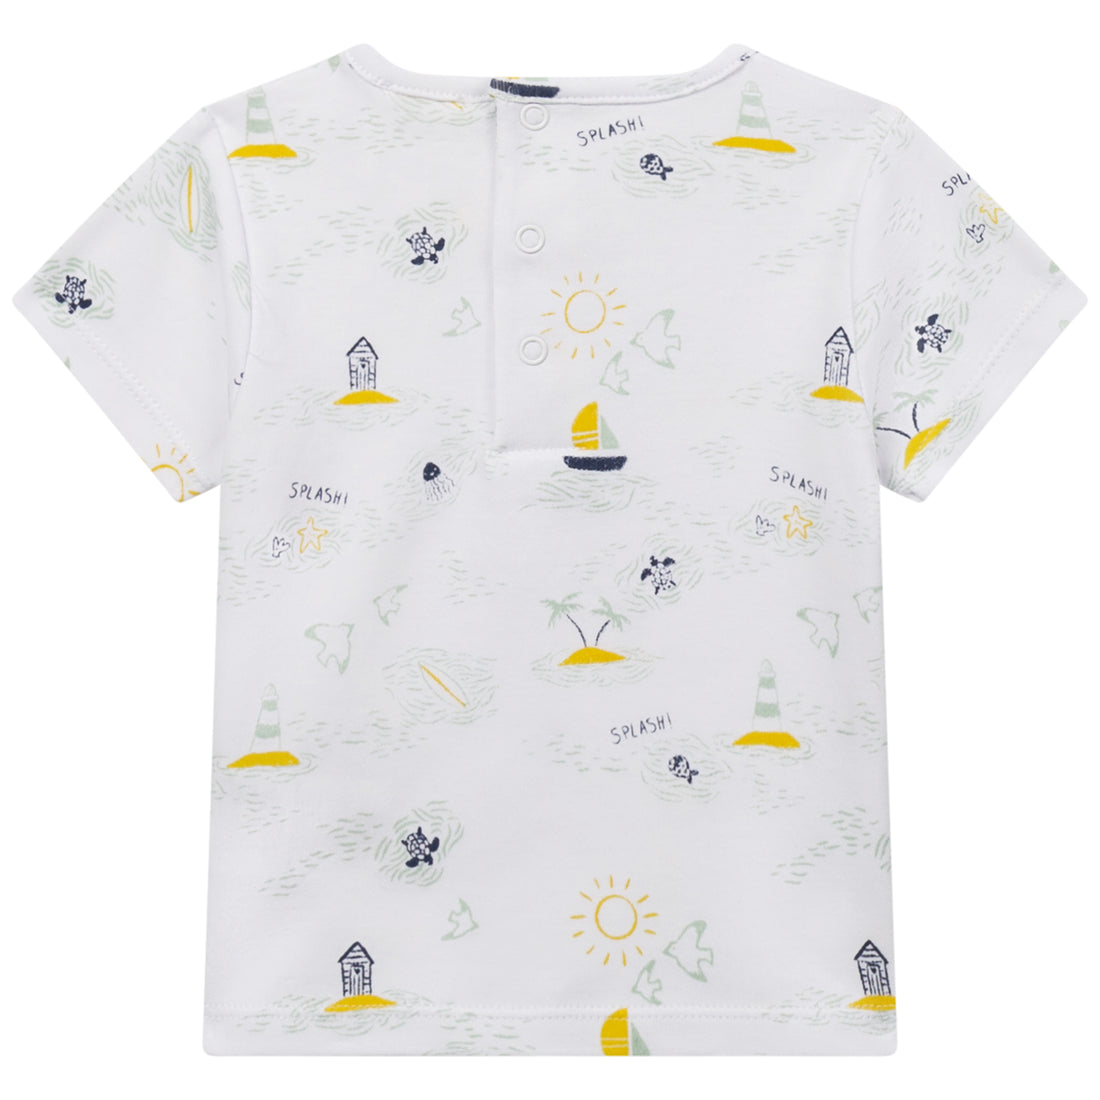 carrément-beau-short-sleeves-tee-shirt-summer-infant-white-carr-s22-y05158-10b-6y- (3)